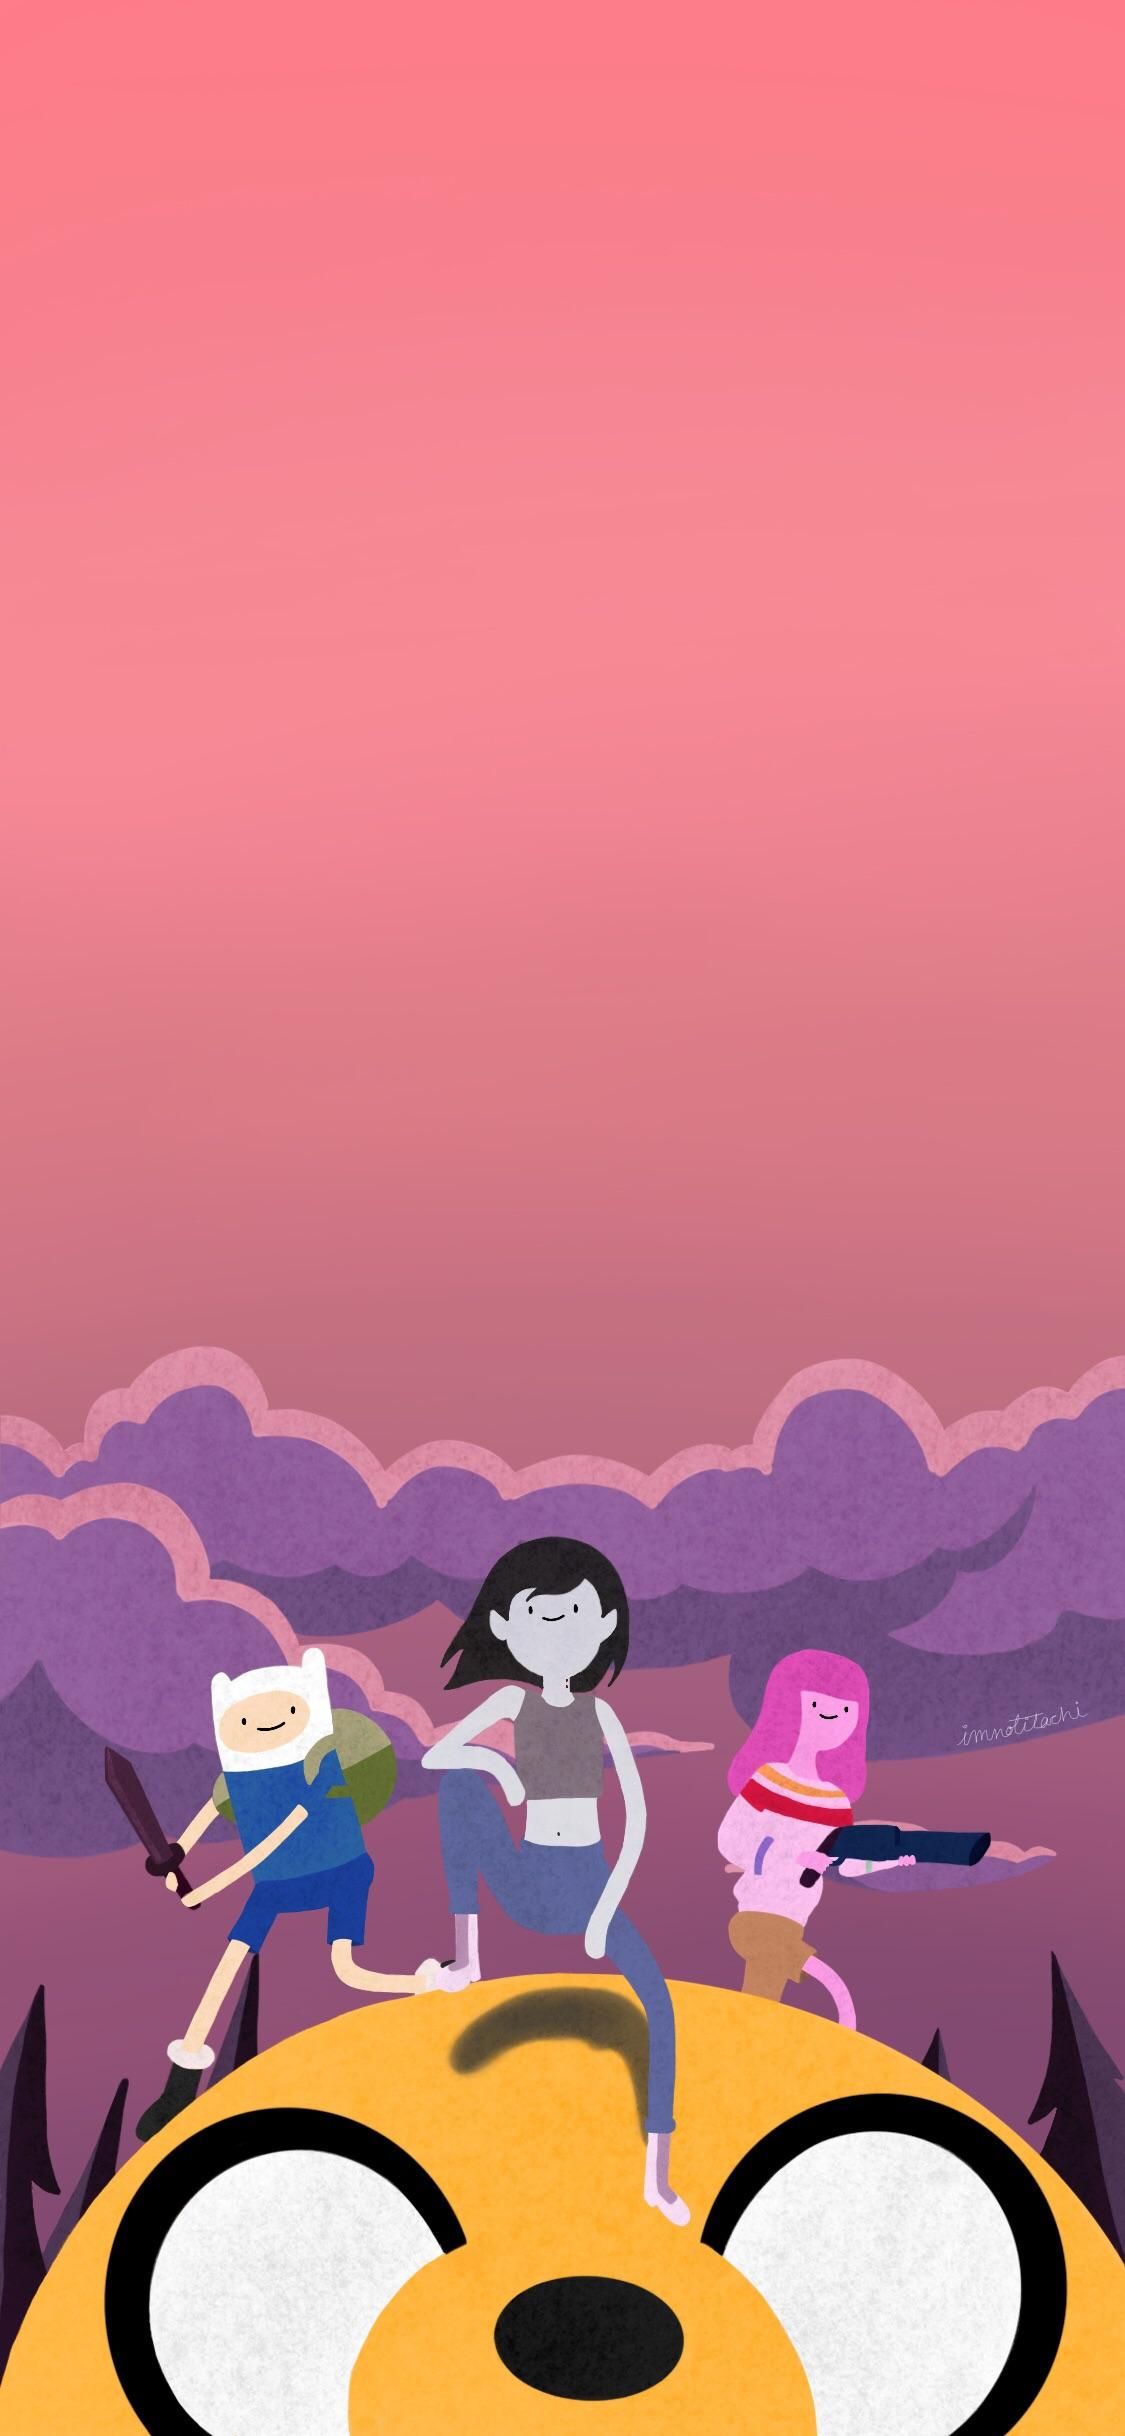 I made a Stakes lock screen, thought y'all might enjoy!, adventuretime. Adventure time iphone wallpaper, Adventure time wallpaper, Cartoon wallpaper iphone